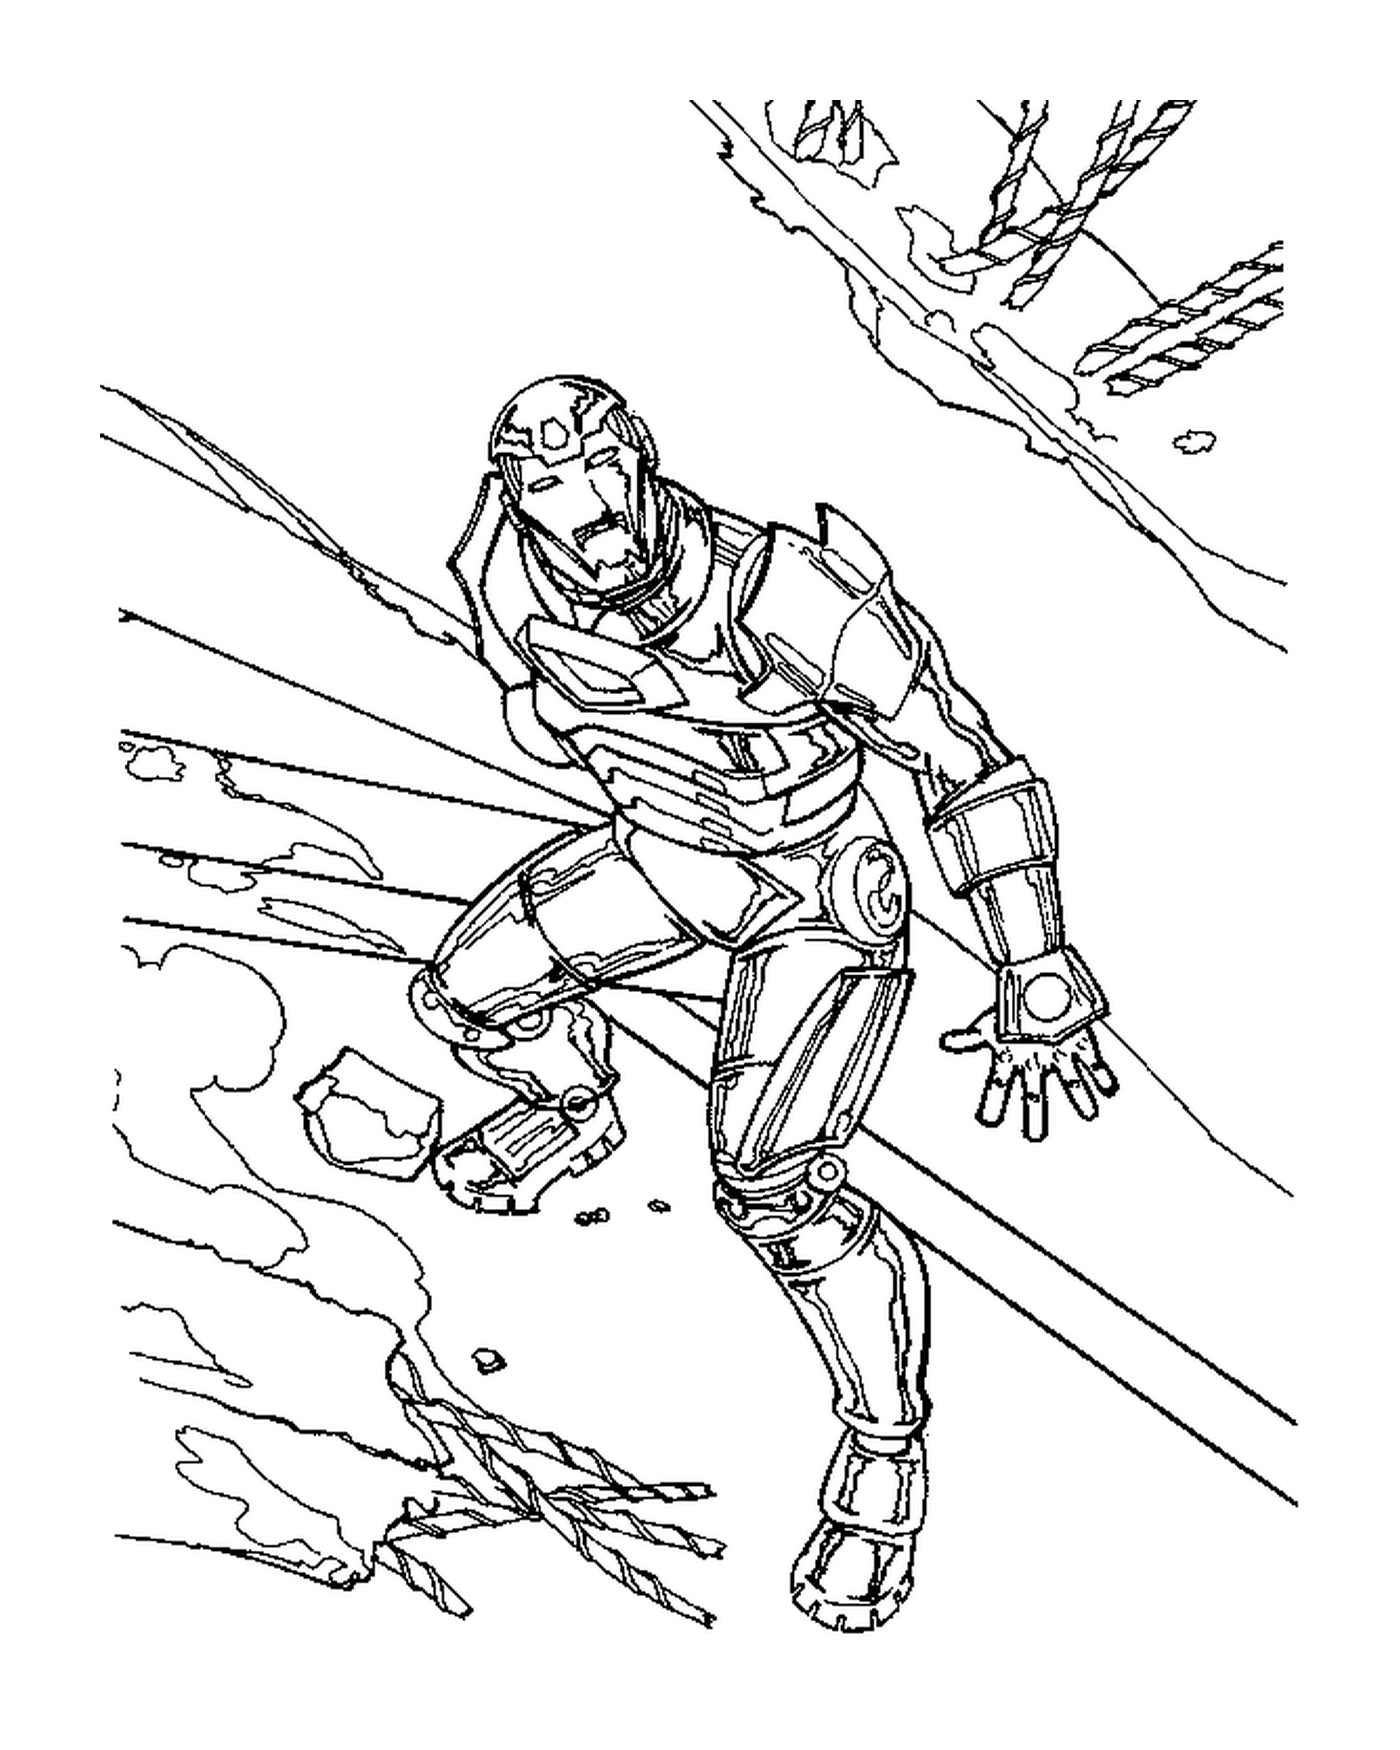  Iron Man in dynamic action 